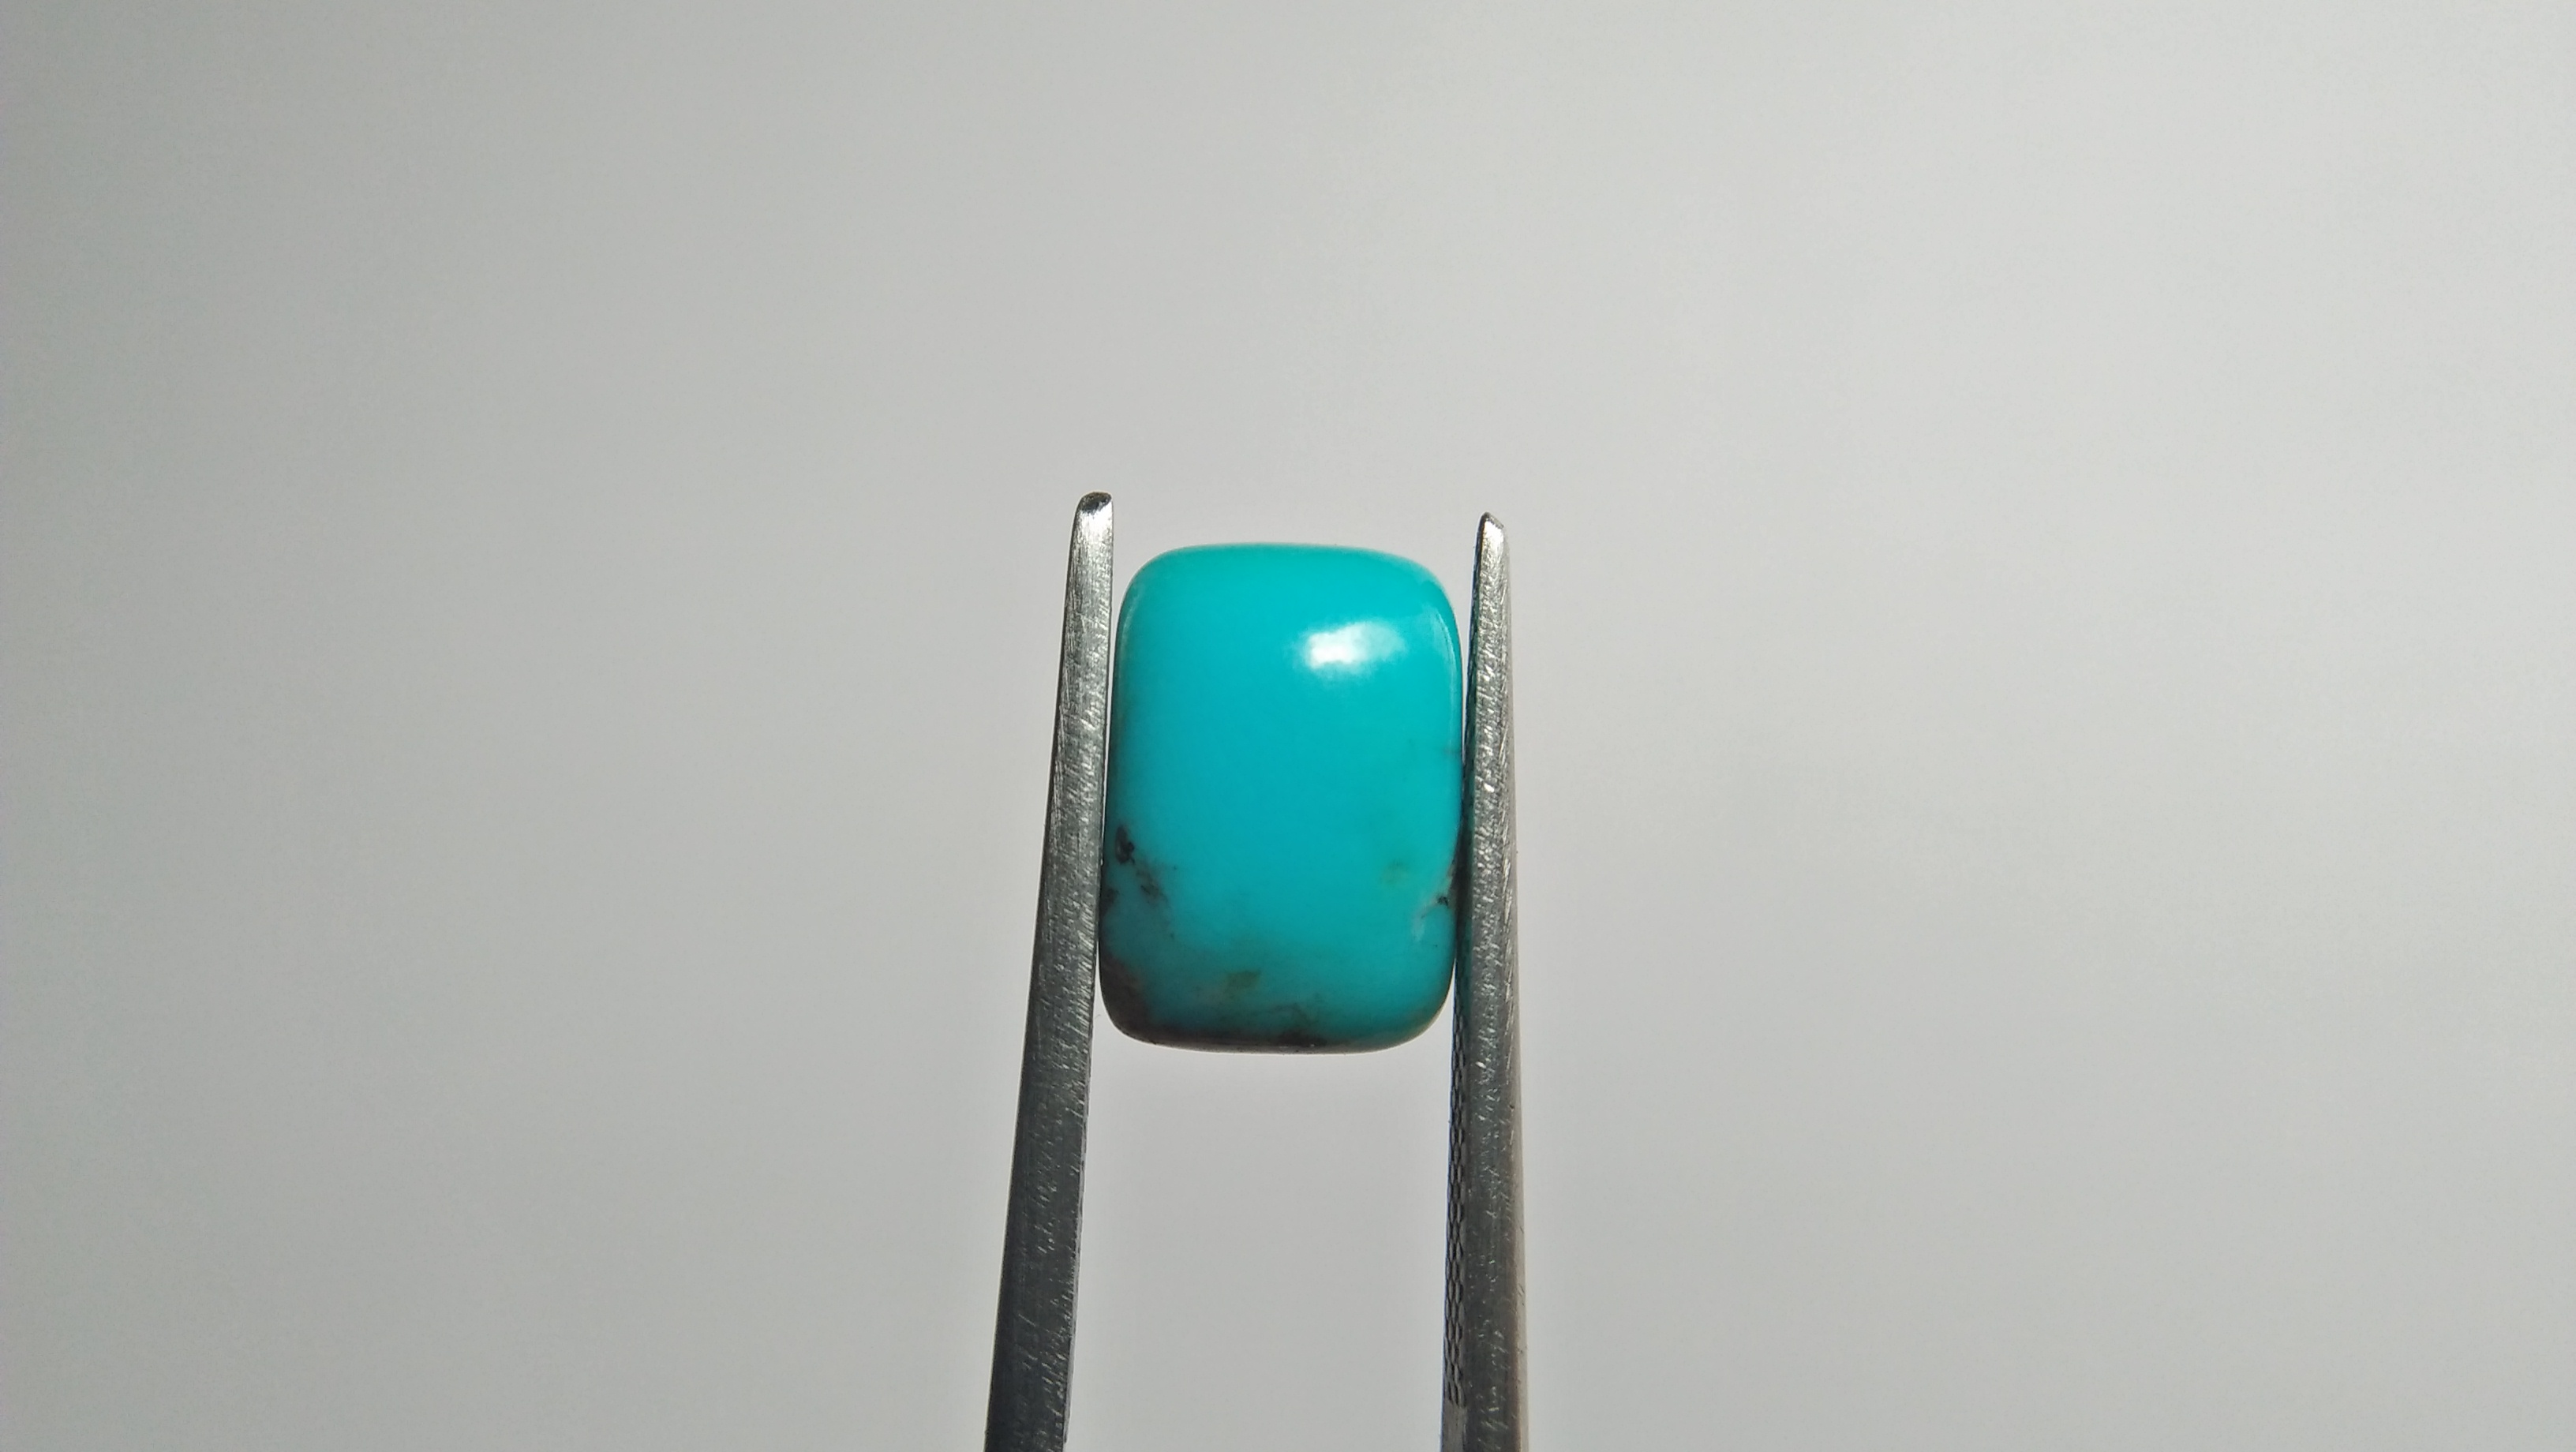 Natural Torquoise 11.5mm x 8mm x 3.5 mm dimension super healing stone for Headaches 🌍 Turquoise is an opaque, blue-to-green mineral that is a hydrated phosphate of copper and aluminium, with the chemical formula CuAl₆(PO₄)₄(OH)₈·4H₂O. In Western culture, turquoise is also the traditional birthstone for those born in the month of December. In many cultures of the Old and New Worlds, this gemstone has been esteemed for thousands of years as a holy stone, a bringer of good fortune or a talisman. The oldest evidence for this claim was found in Ancient Egypt, where grave furnishings with turquoise inlay were discovered, dating from approximately 3000 BCE.